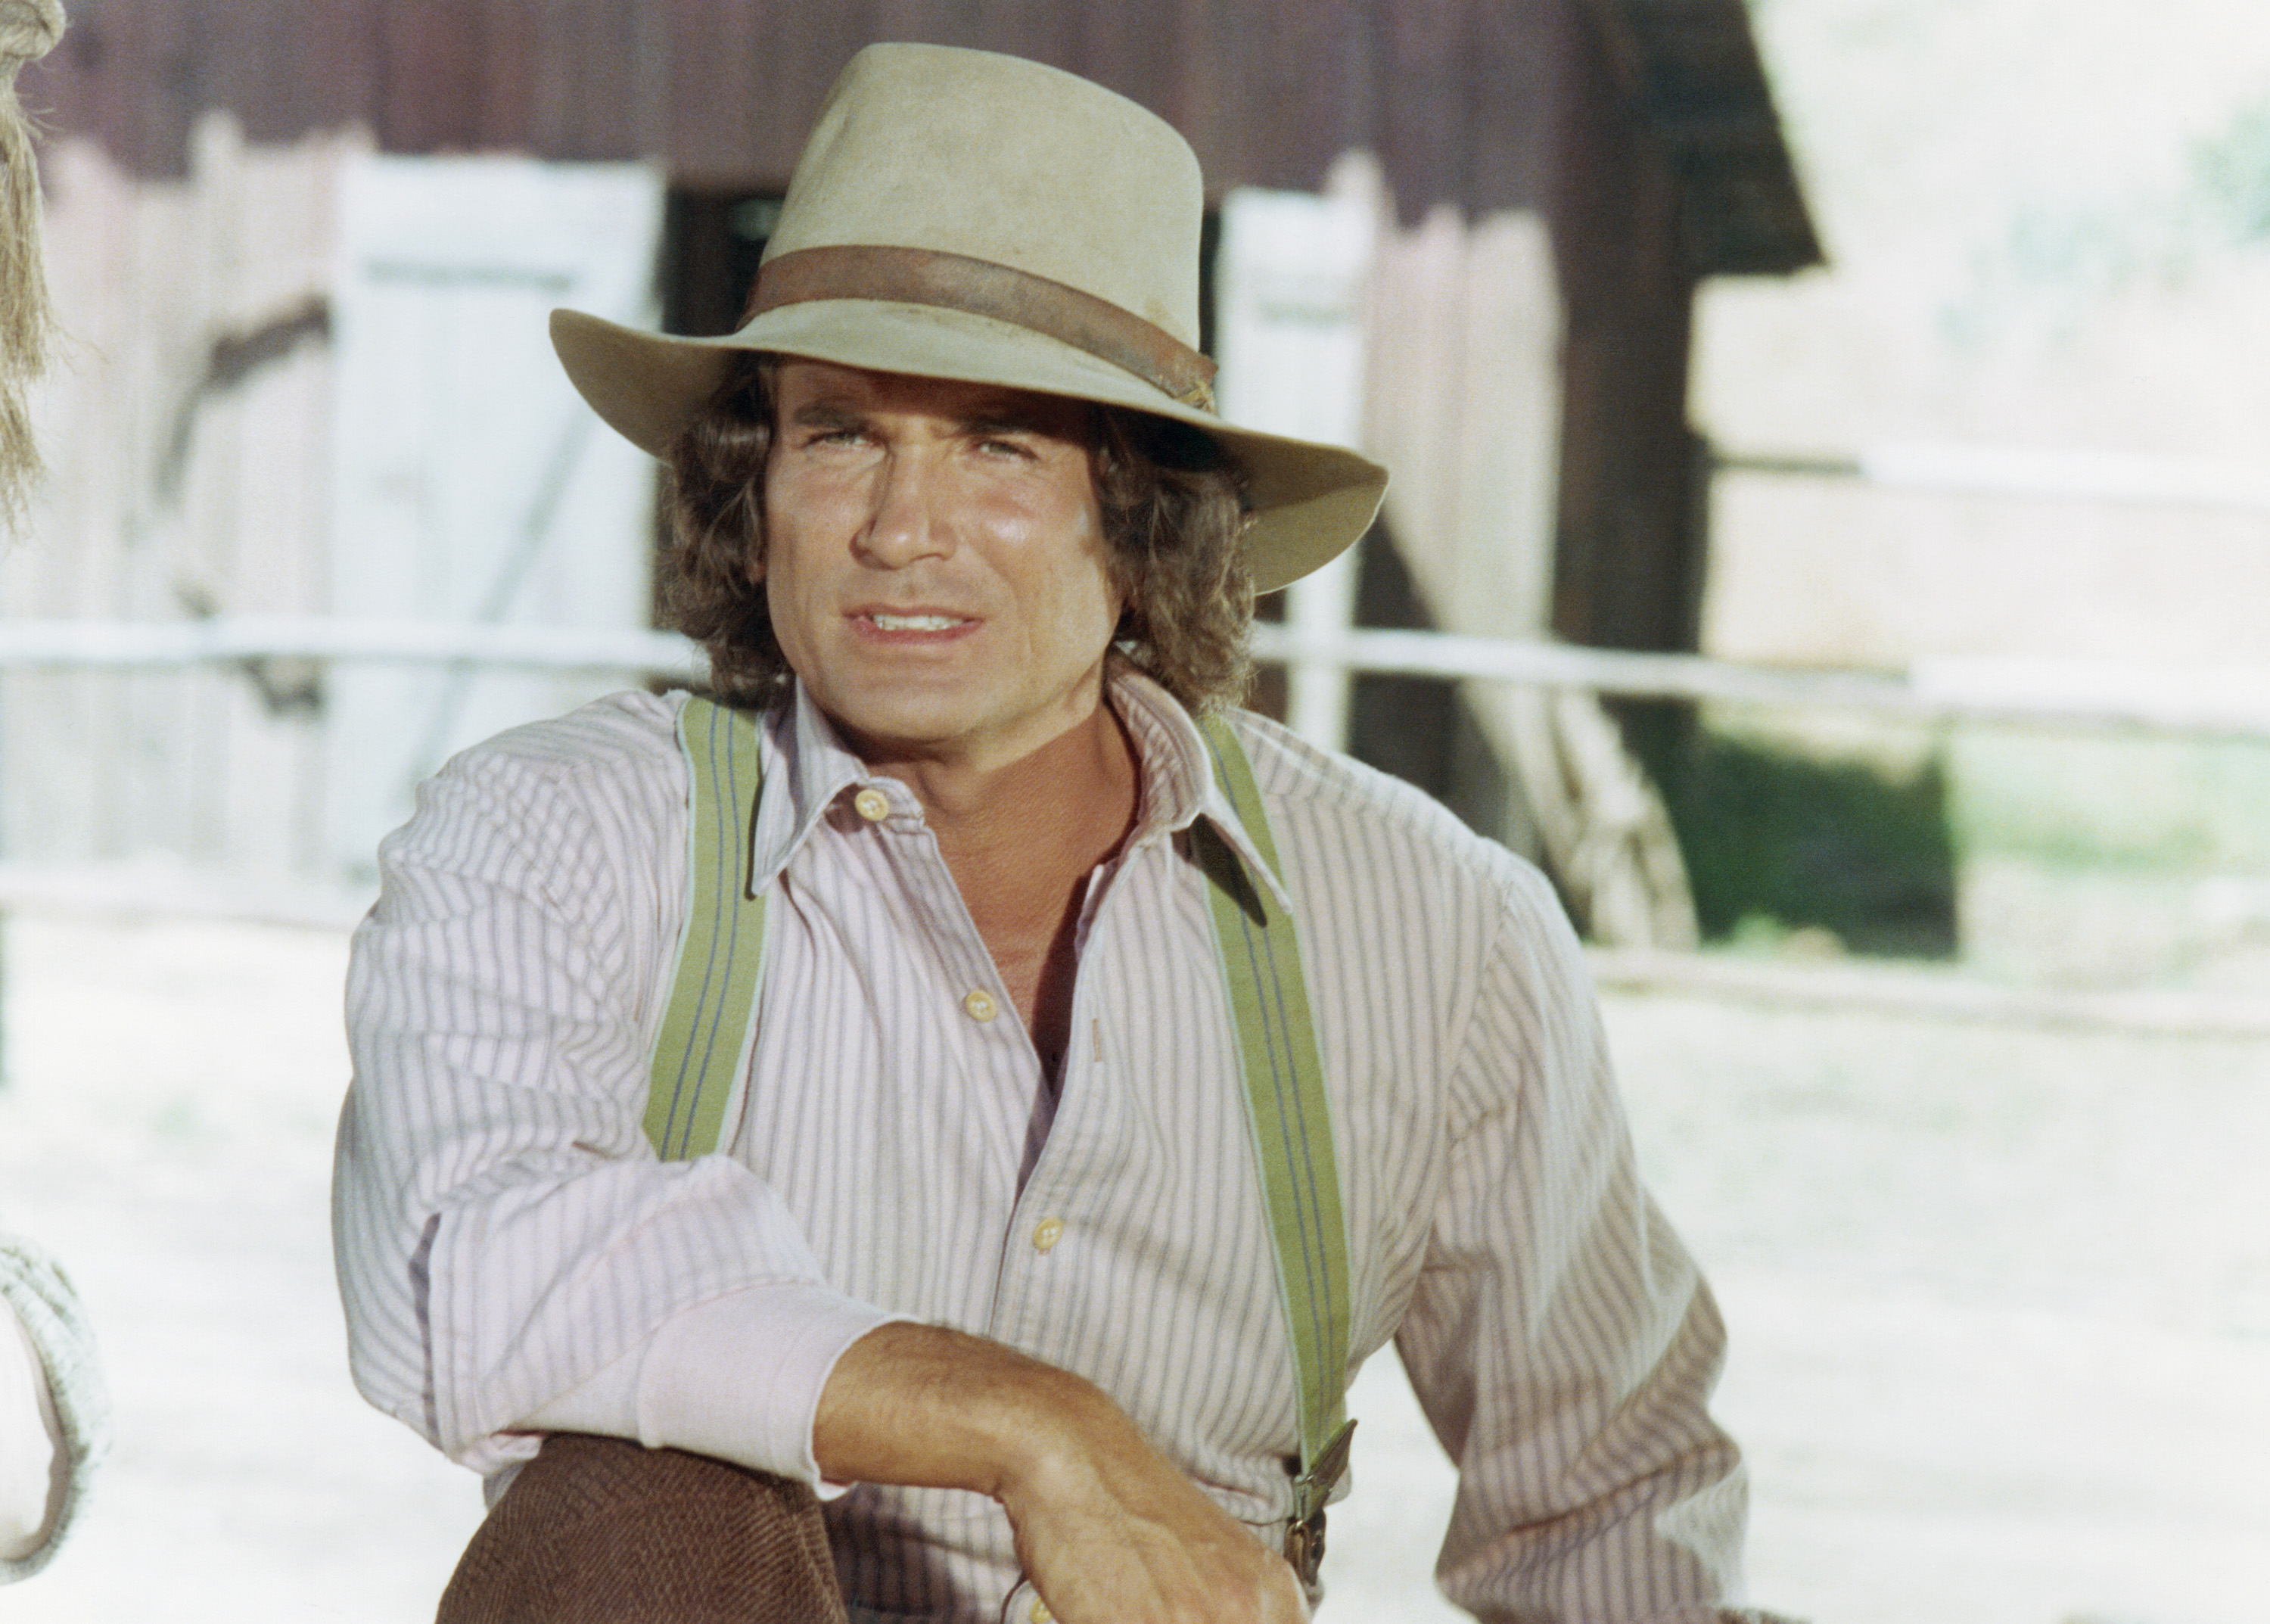 Michael Landon as Charles Ingalls | NBCU Photo Bank/NBCUniversal via Getty Images via Getty Images